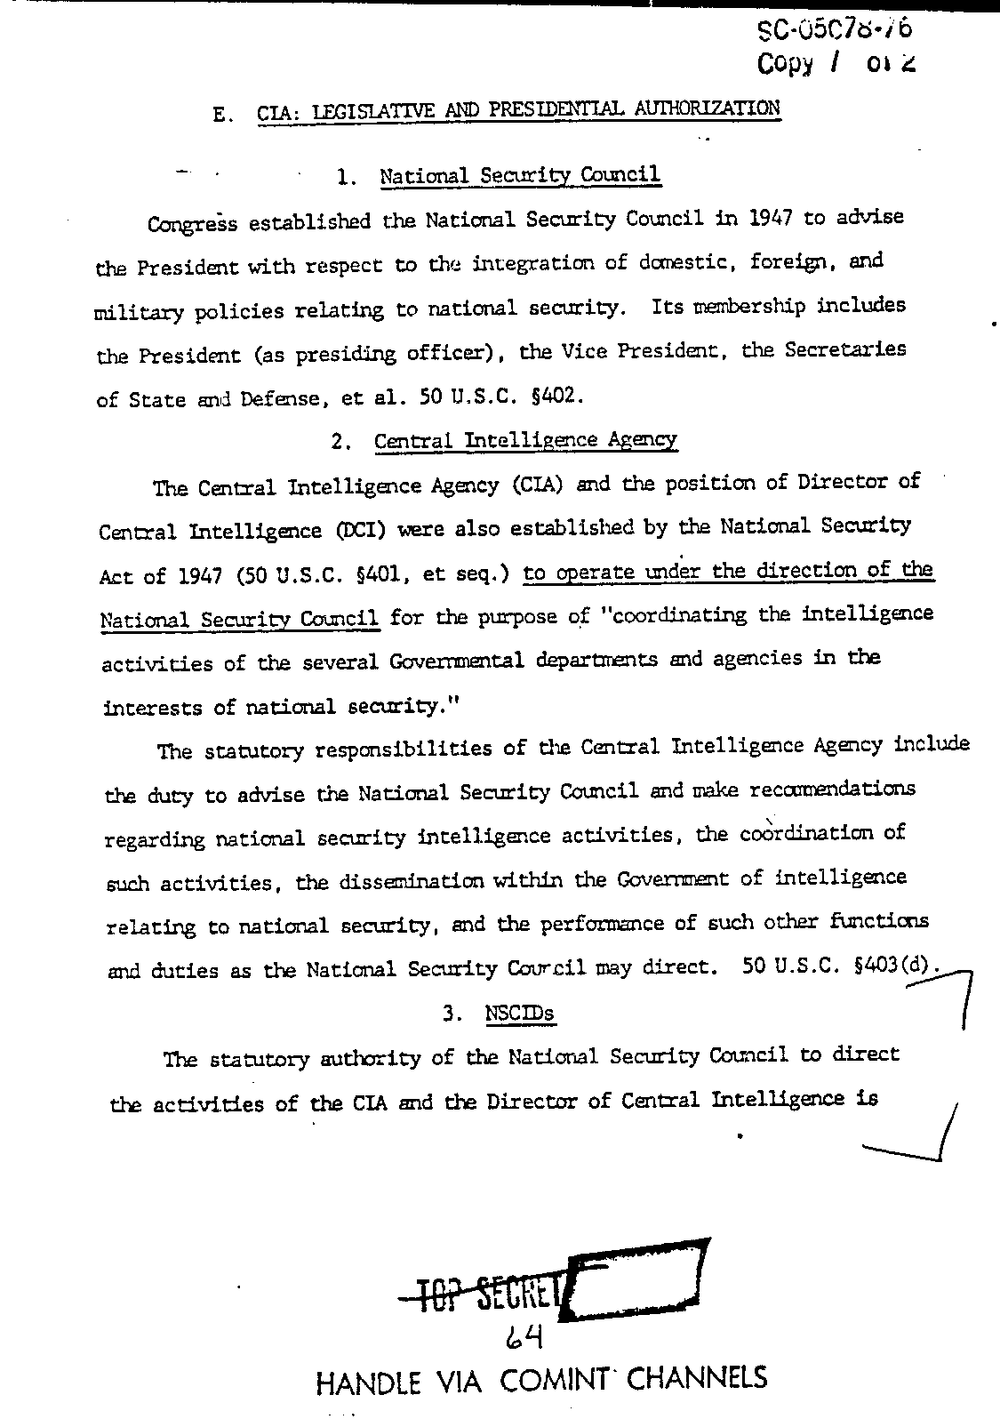 Page 72 from Report on Inquiry Into CIA Related Electronic Surveillance Activities